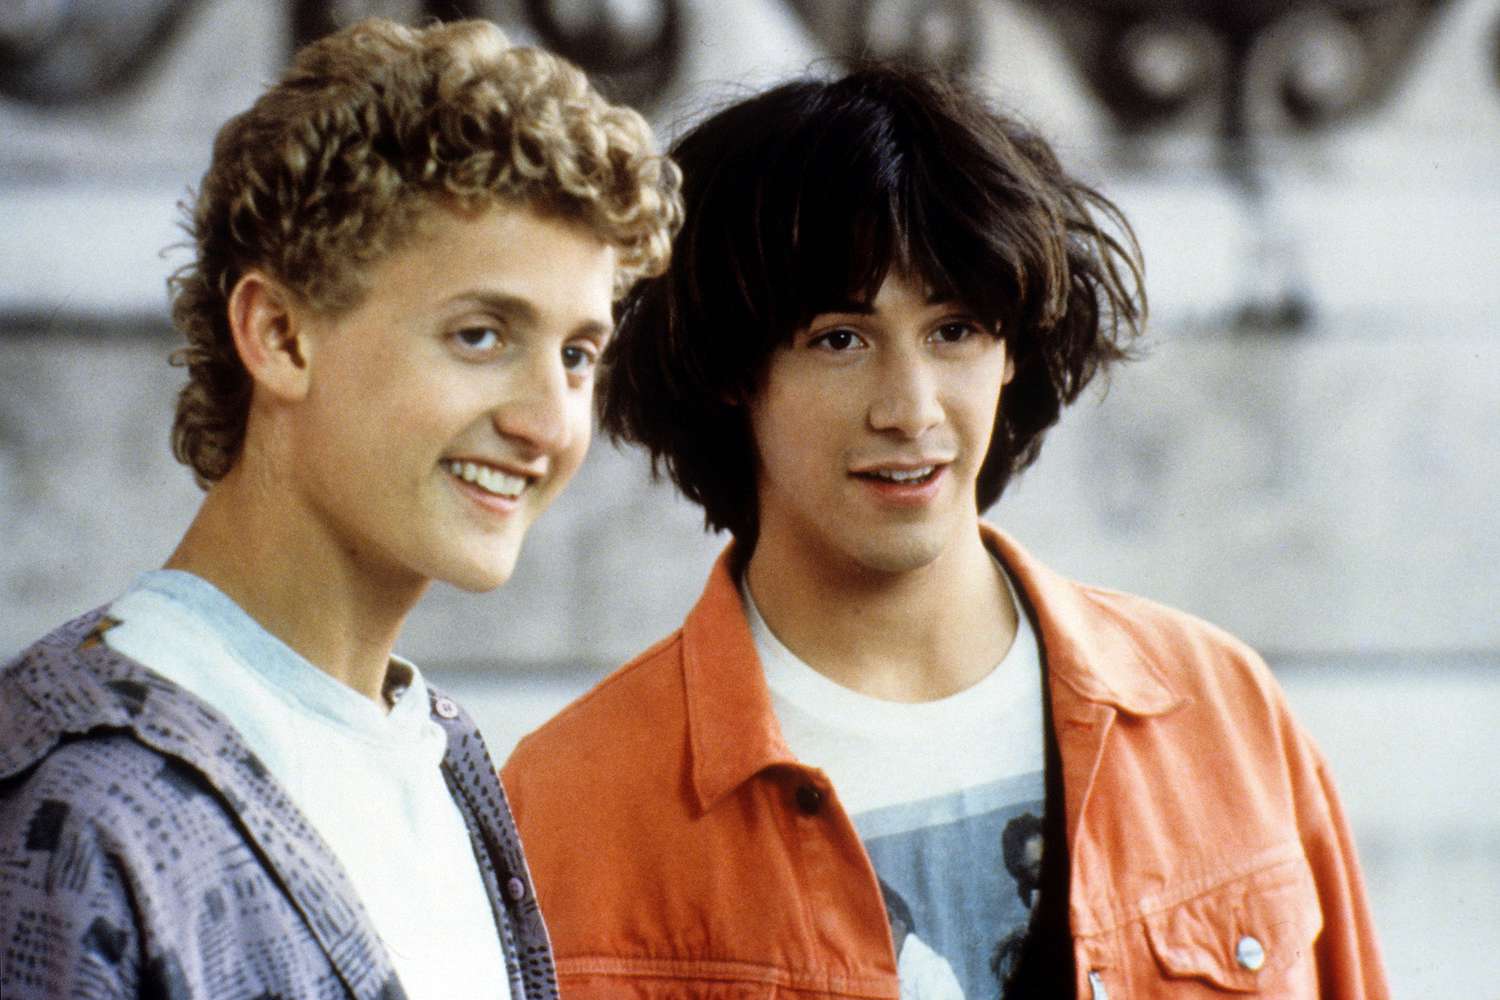 Alex Winter and Keanu Reeves in 'Bill & Ted's Excellent Adventure'